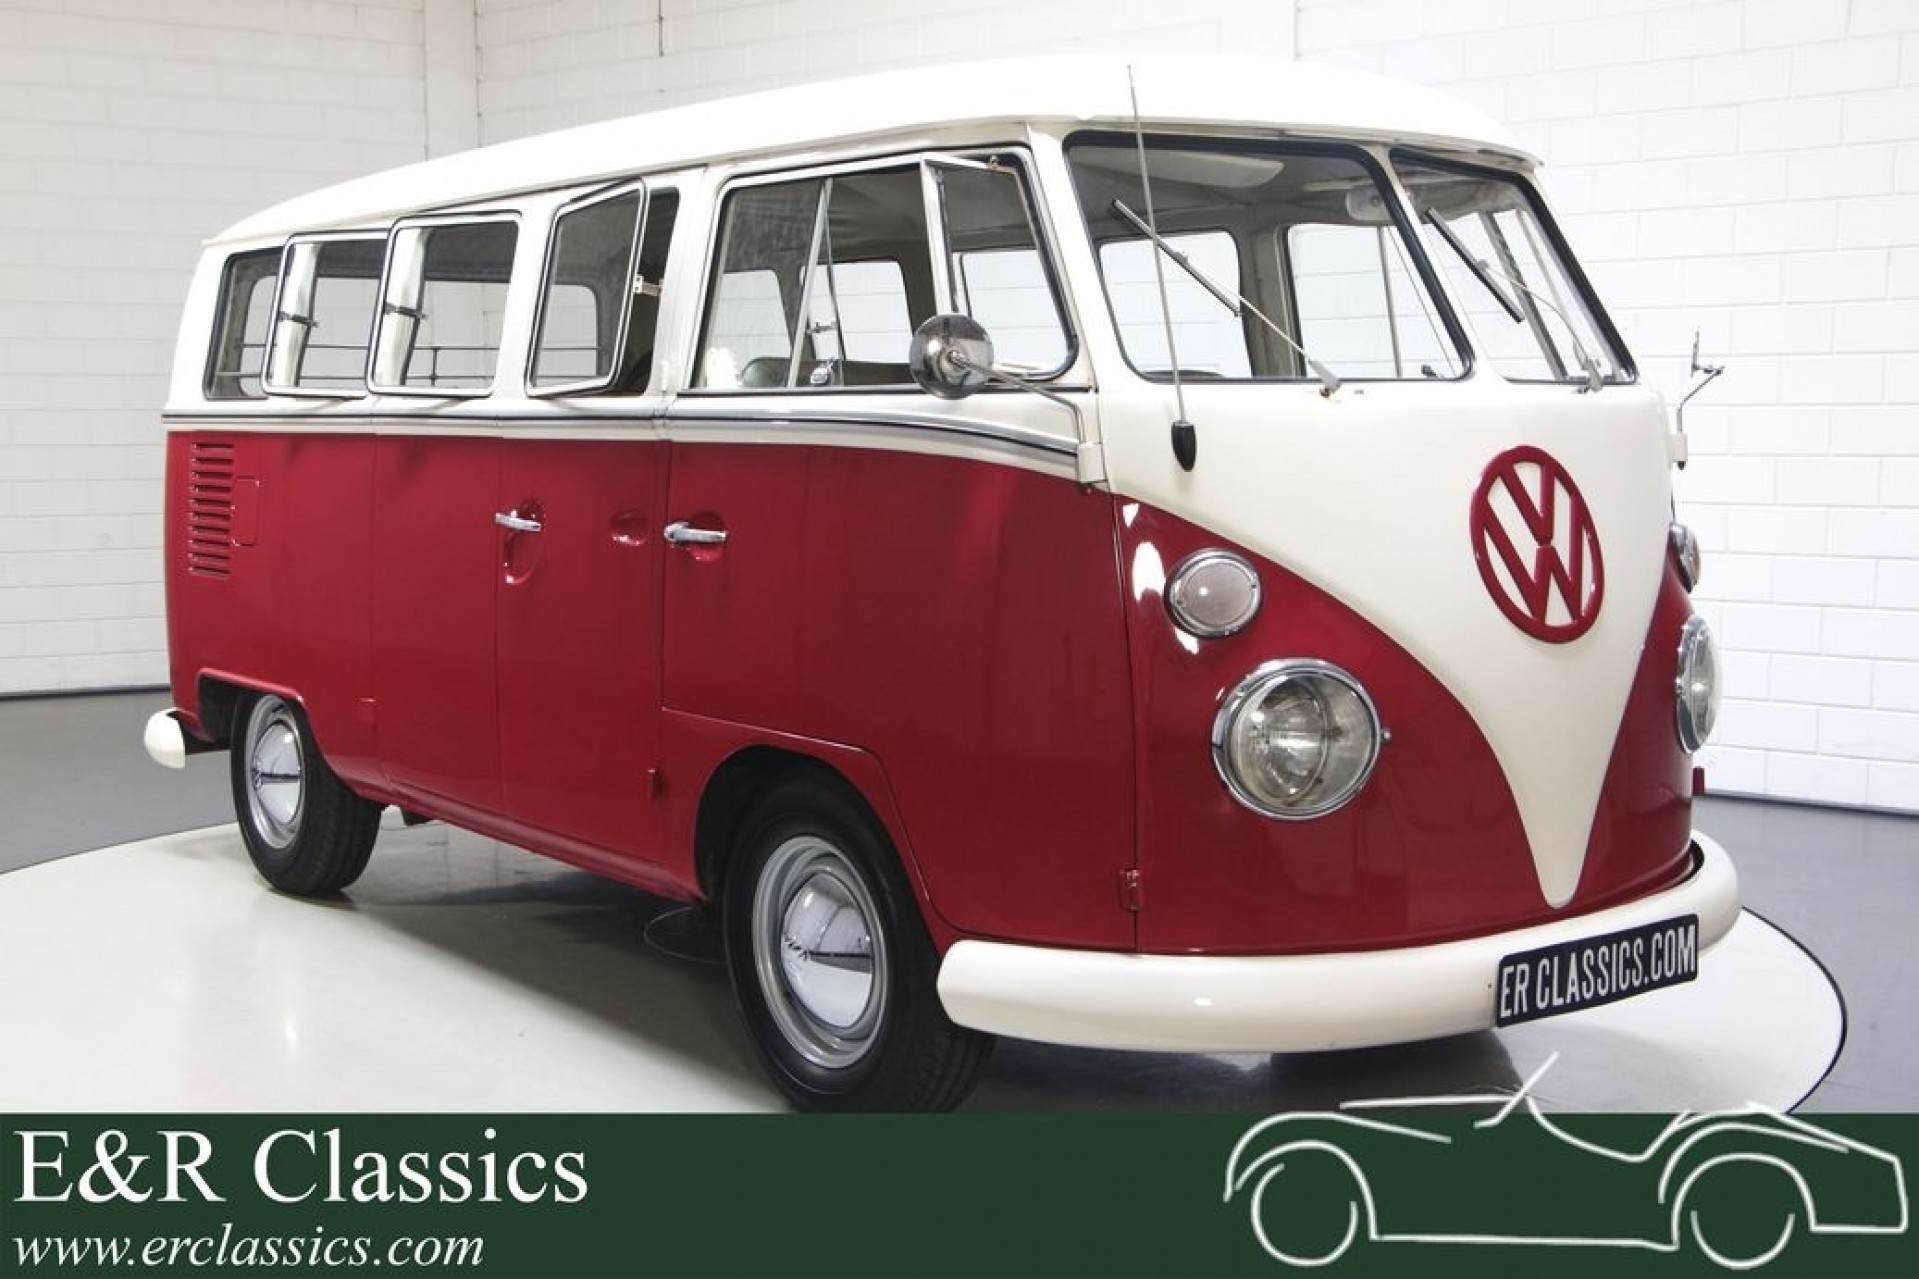 Rally Roest Flipper Volkswagen T1 Bus for sale at ERclassics